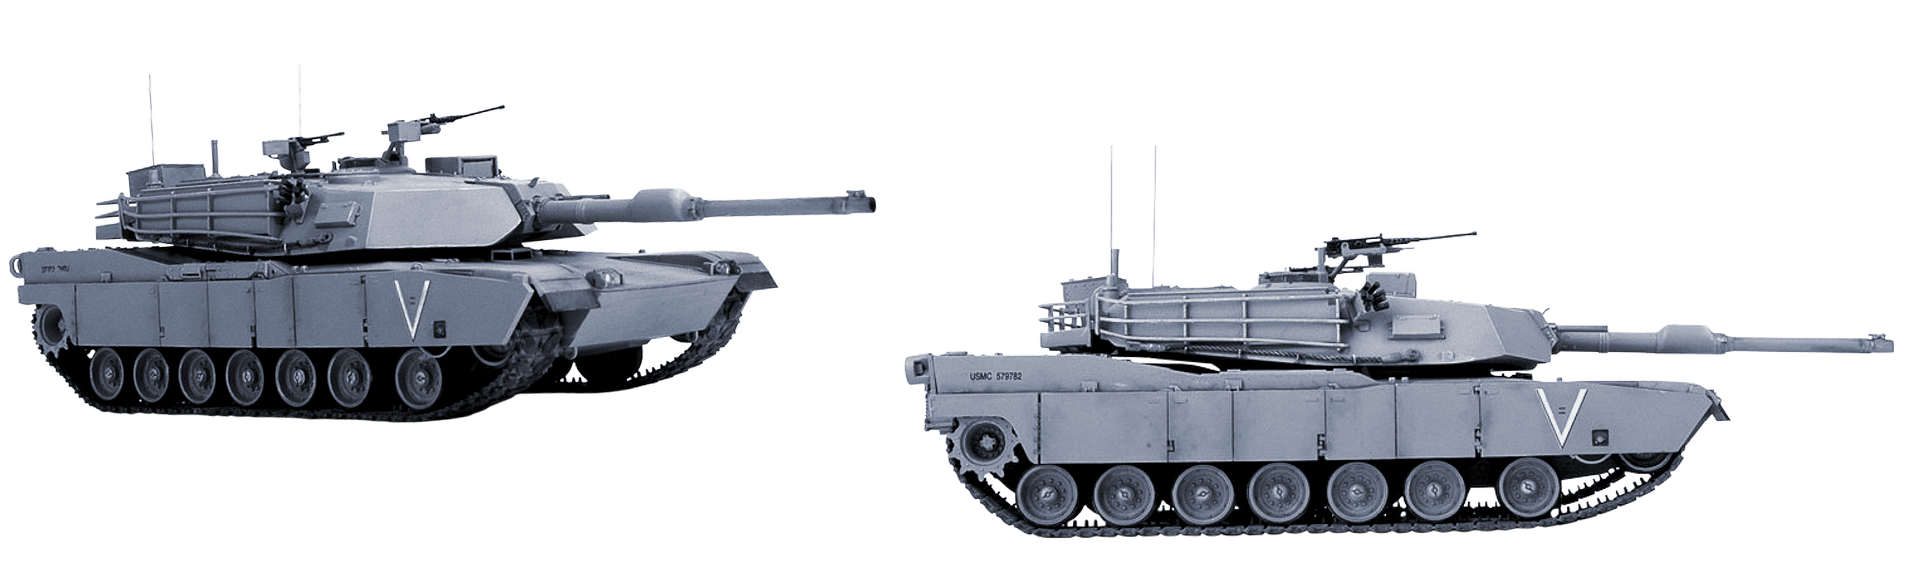 tank from two perspectives